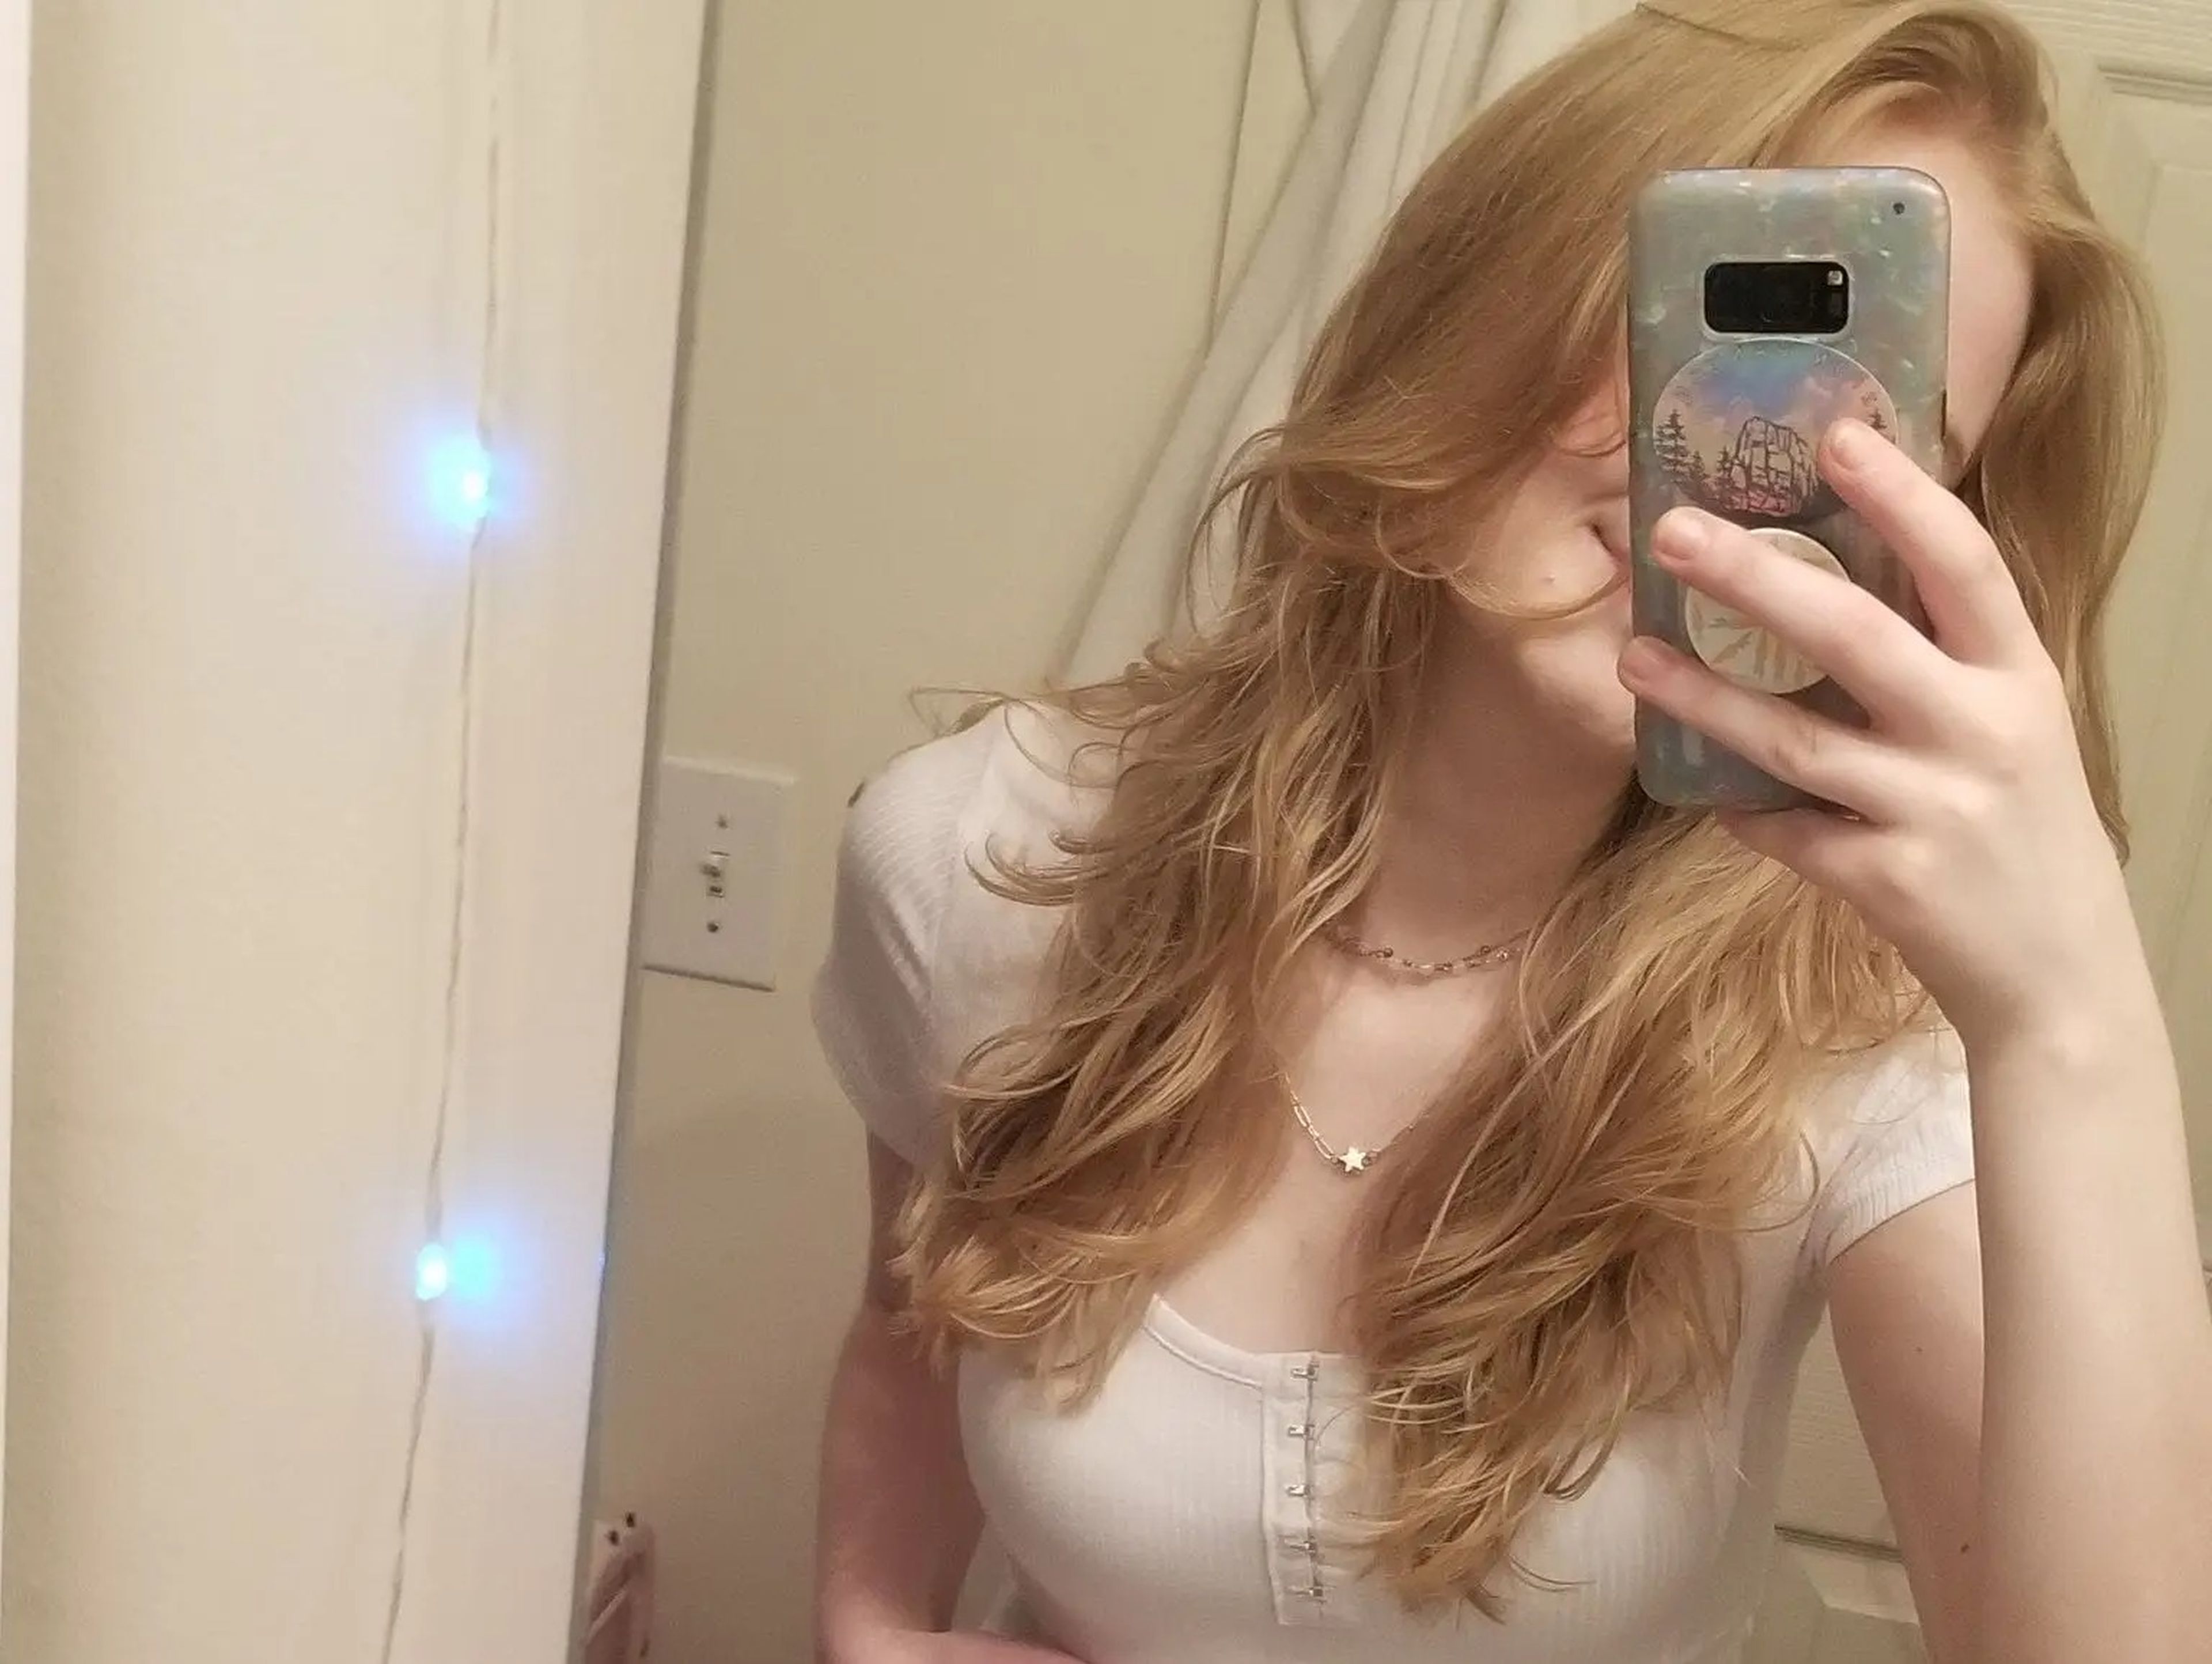 A mirror selfie of Riley, who has strawberry blonde hair and pale skin. Her face is obscured by her phone.